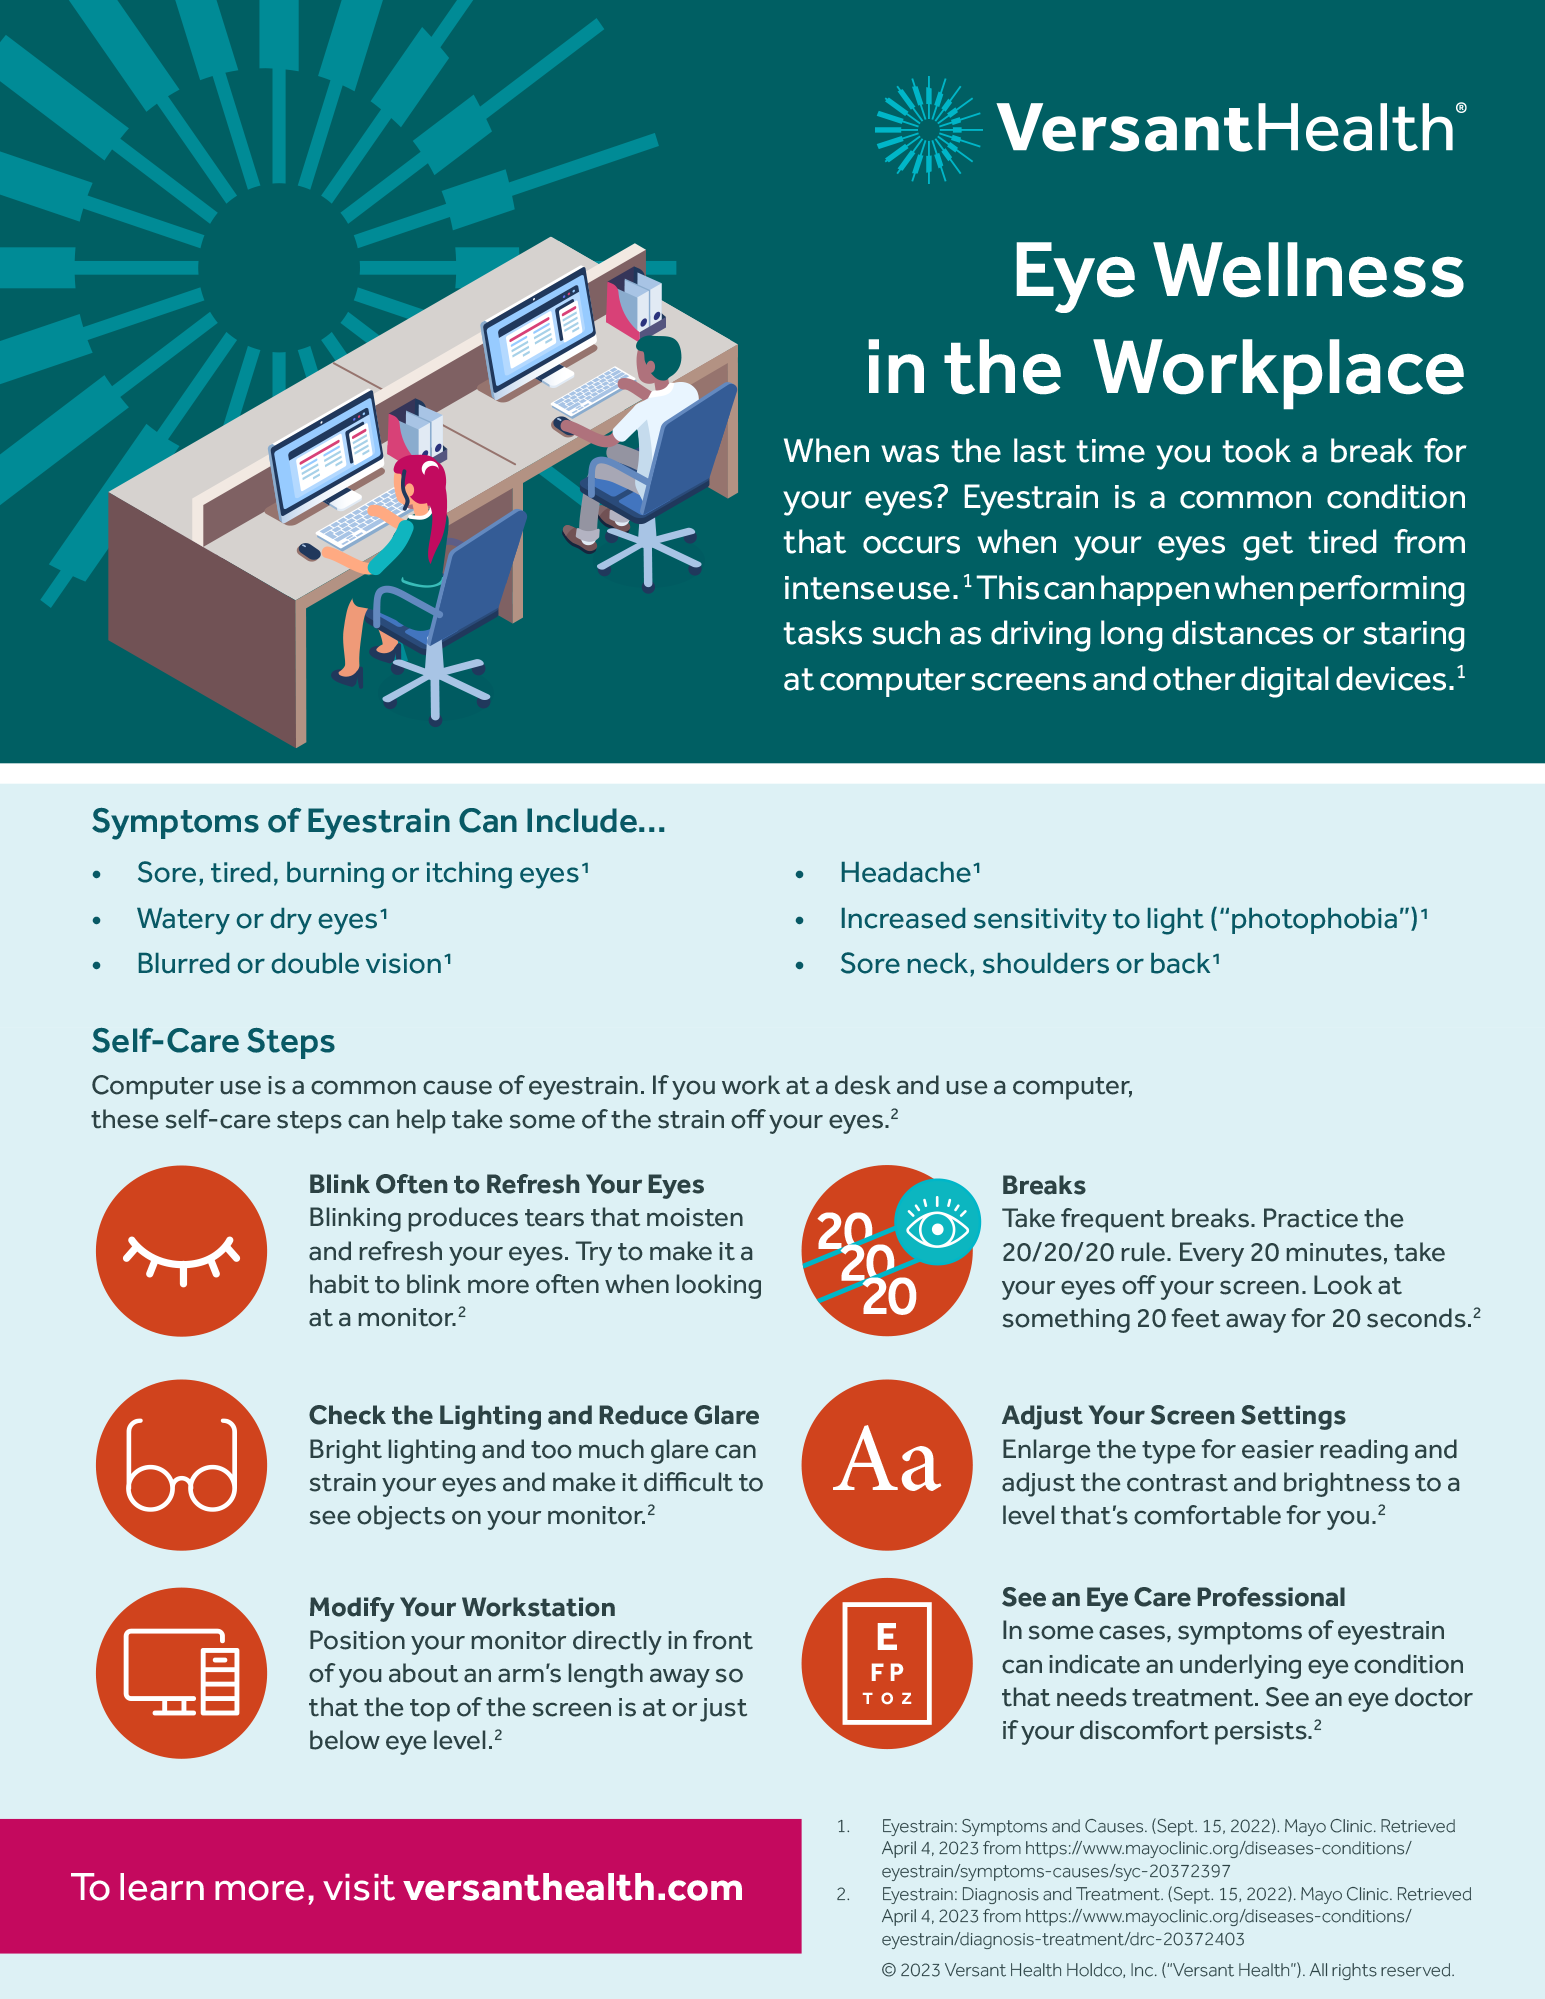 An infographic that talks about eye wellness in the workplace